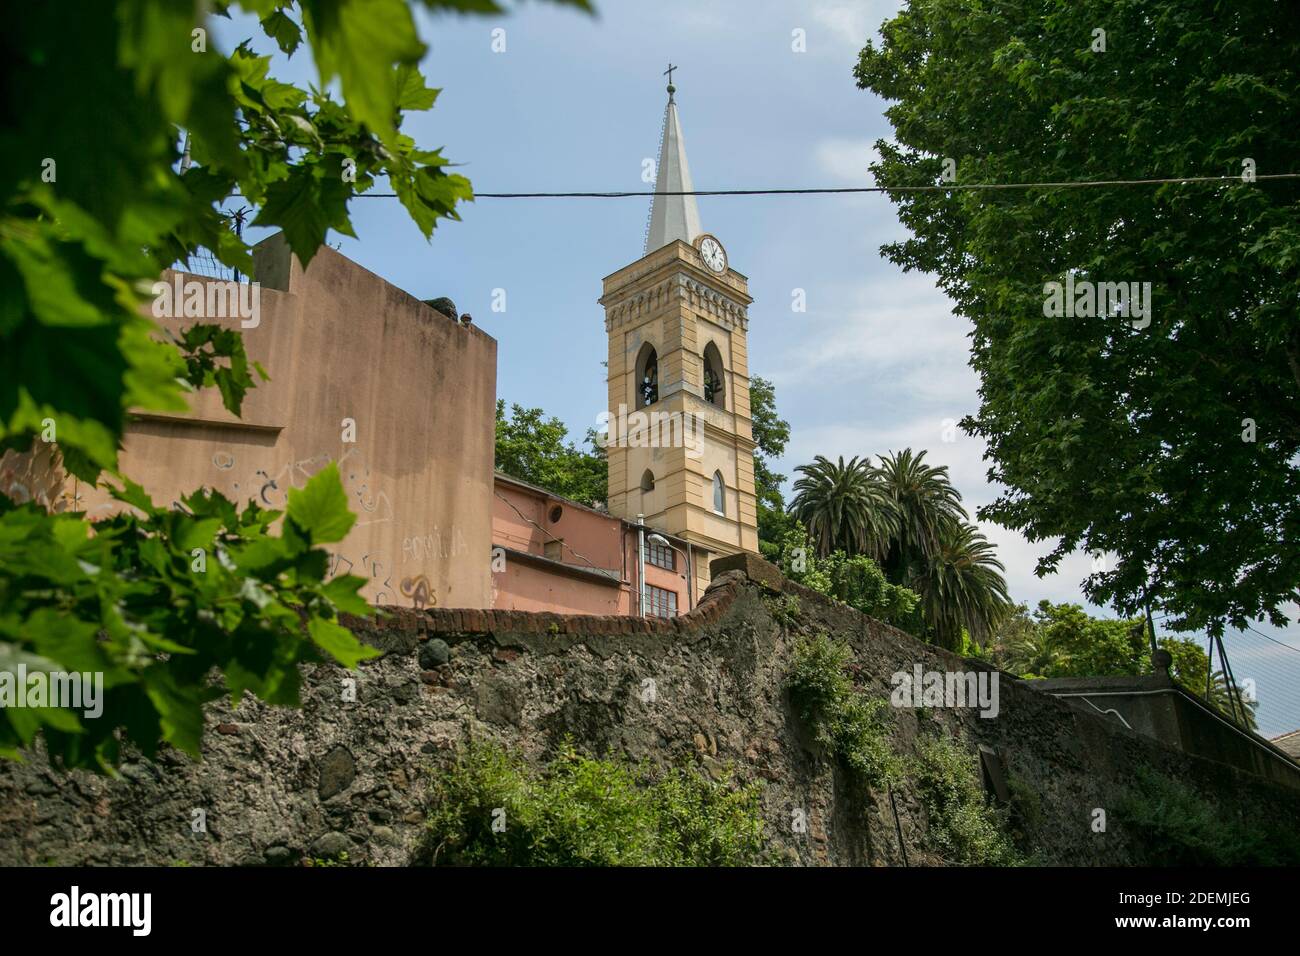 Italian seen of a Cathedral surrounded by a garden and a brick wall Stock Photo